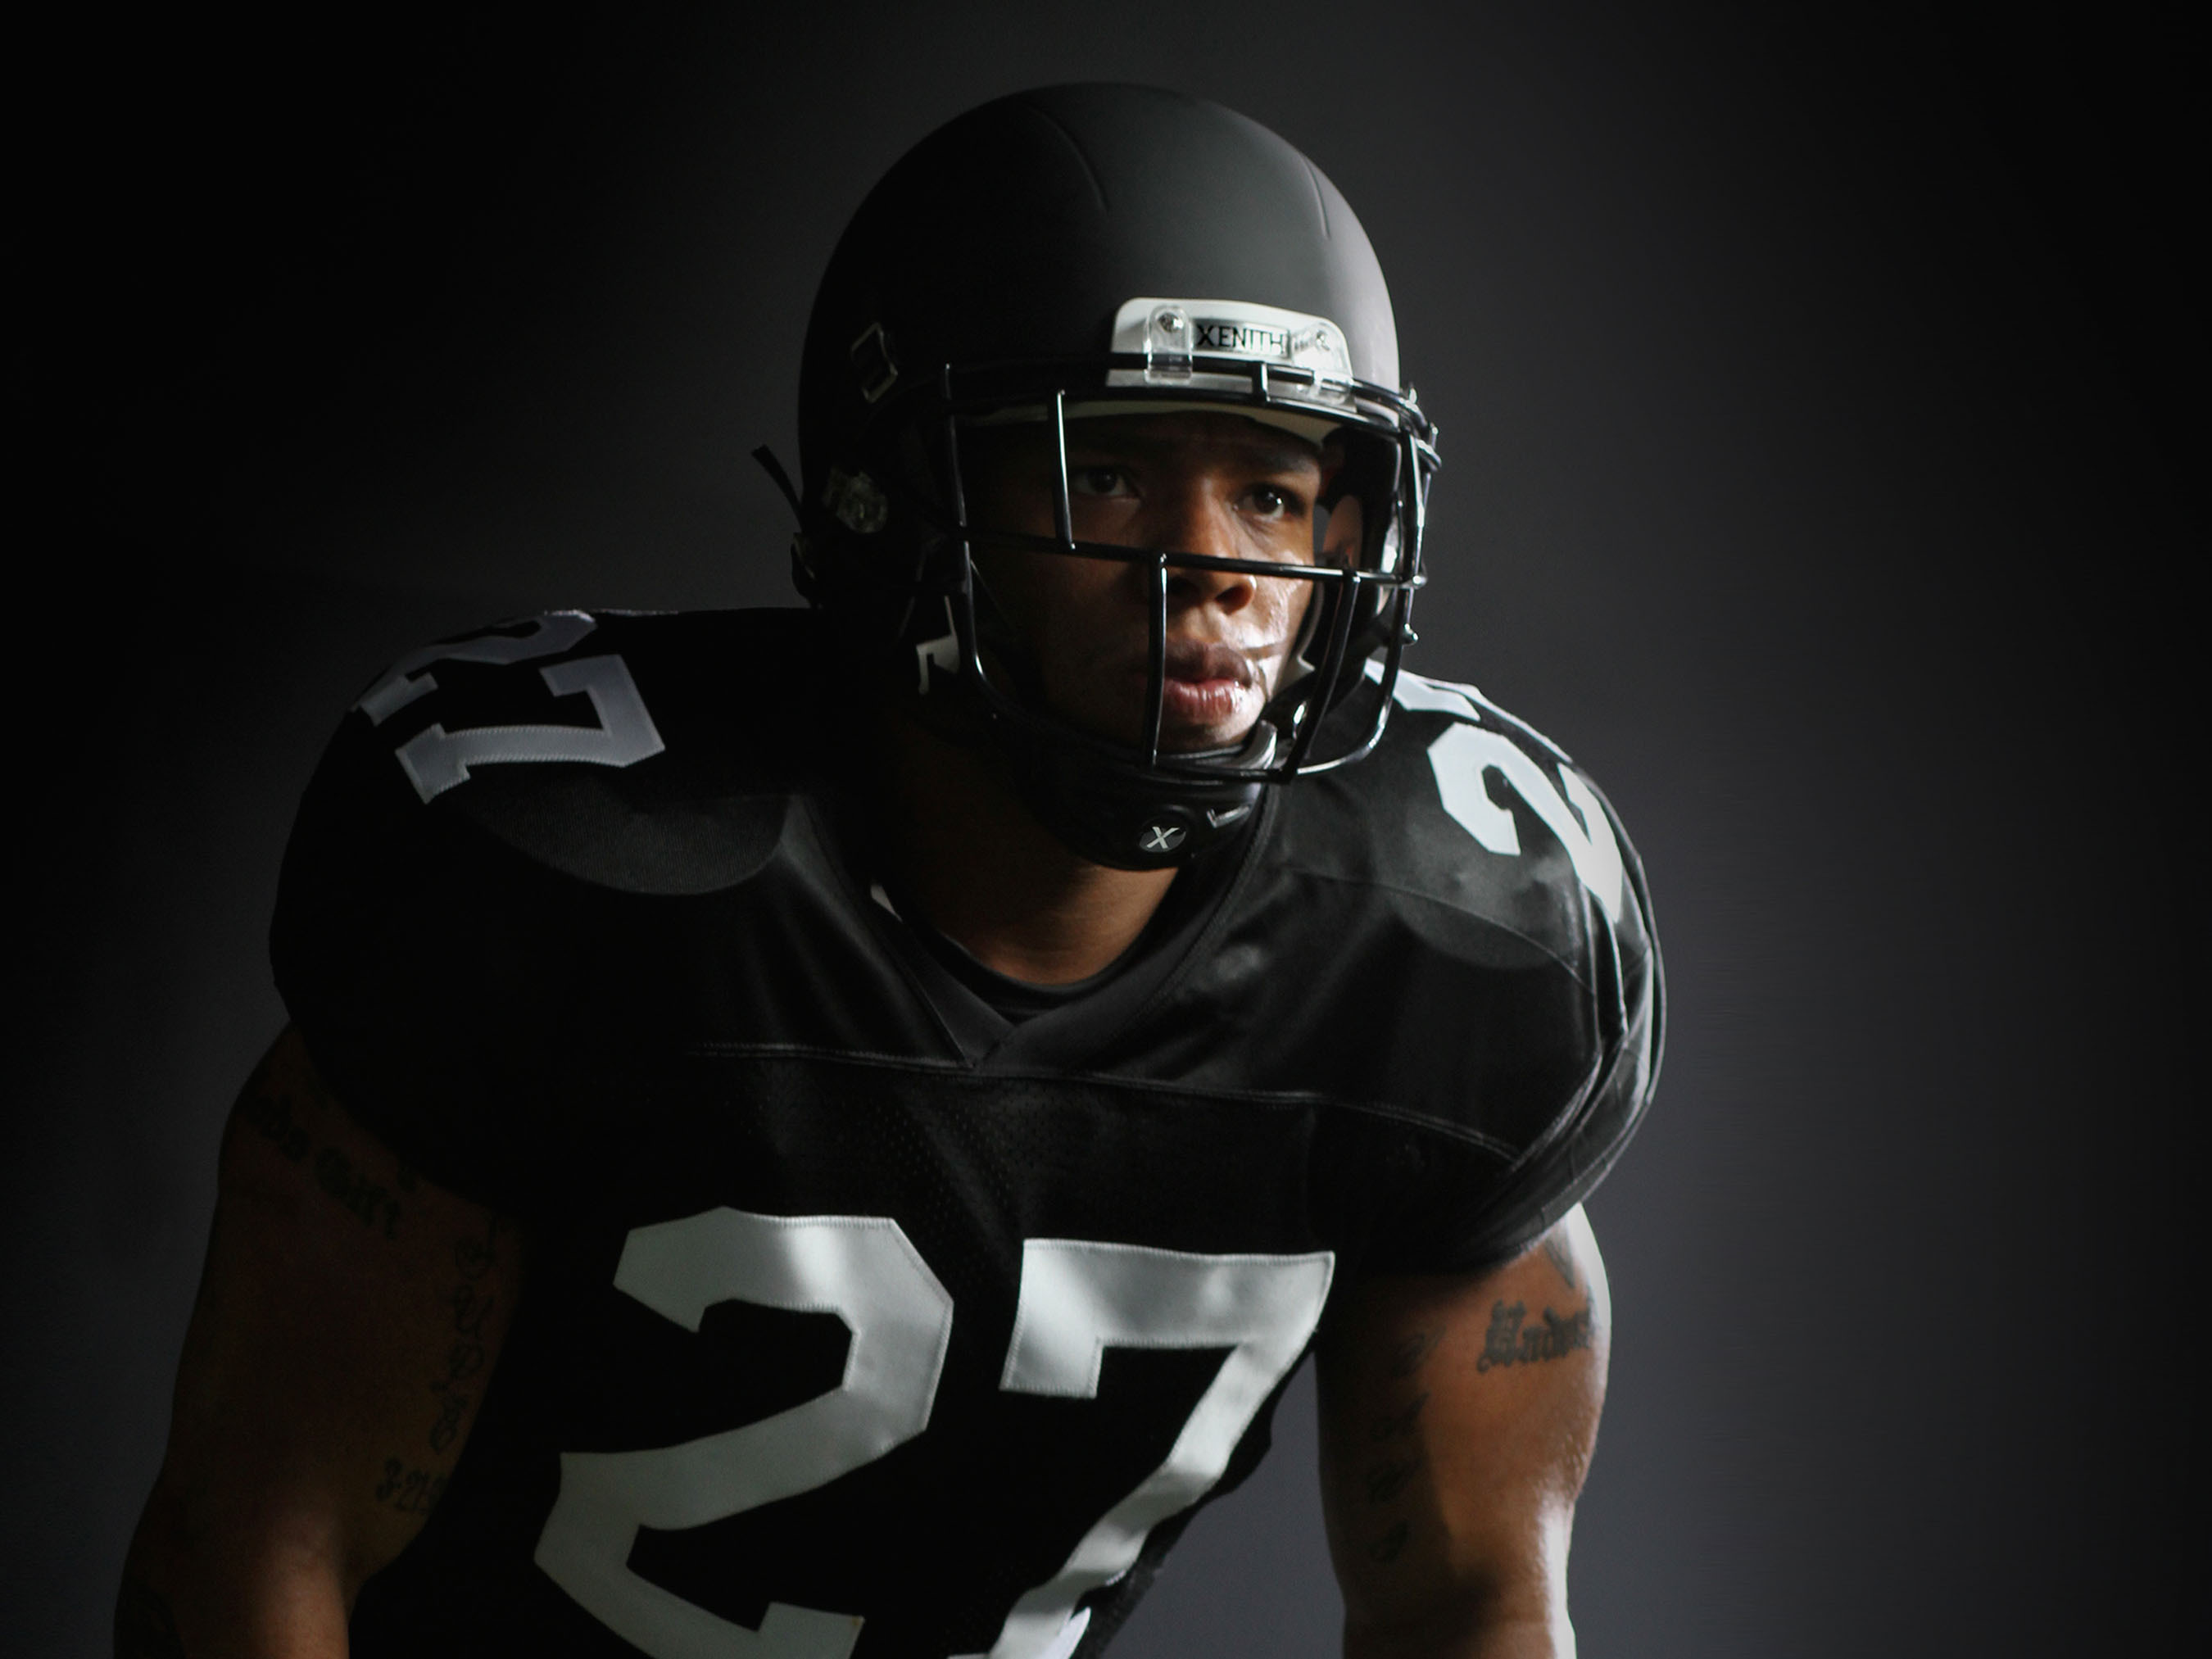 Baltimore Ravens RB Ray Rice Announces Partnership With Xenith Football Helmets - Super Bowl XLVII Participant Touts X2 Helmet's Fit, Comfort and Protection. (PRNewsFoto/Xenith LLC) (PRNewsFoto/XENITH LLC)